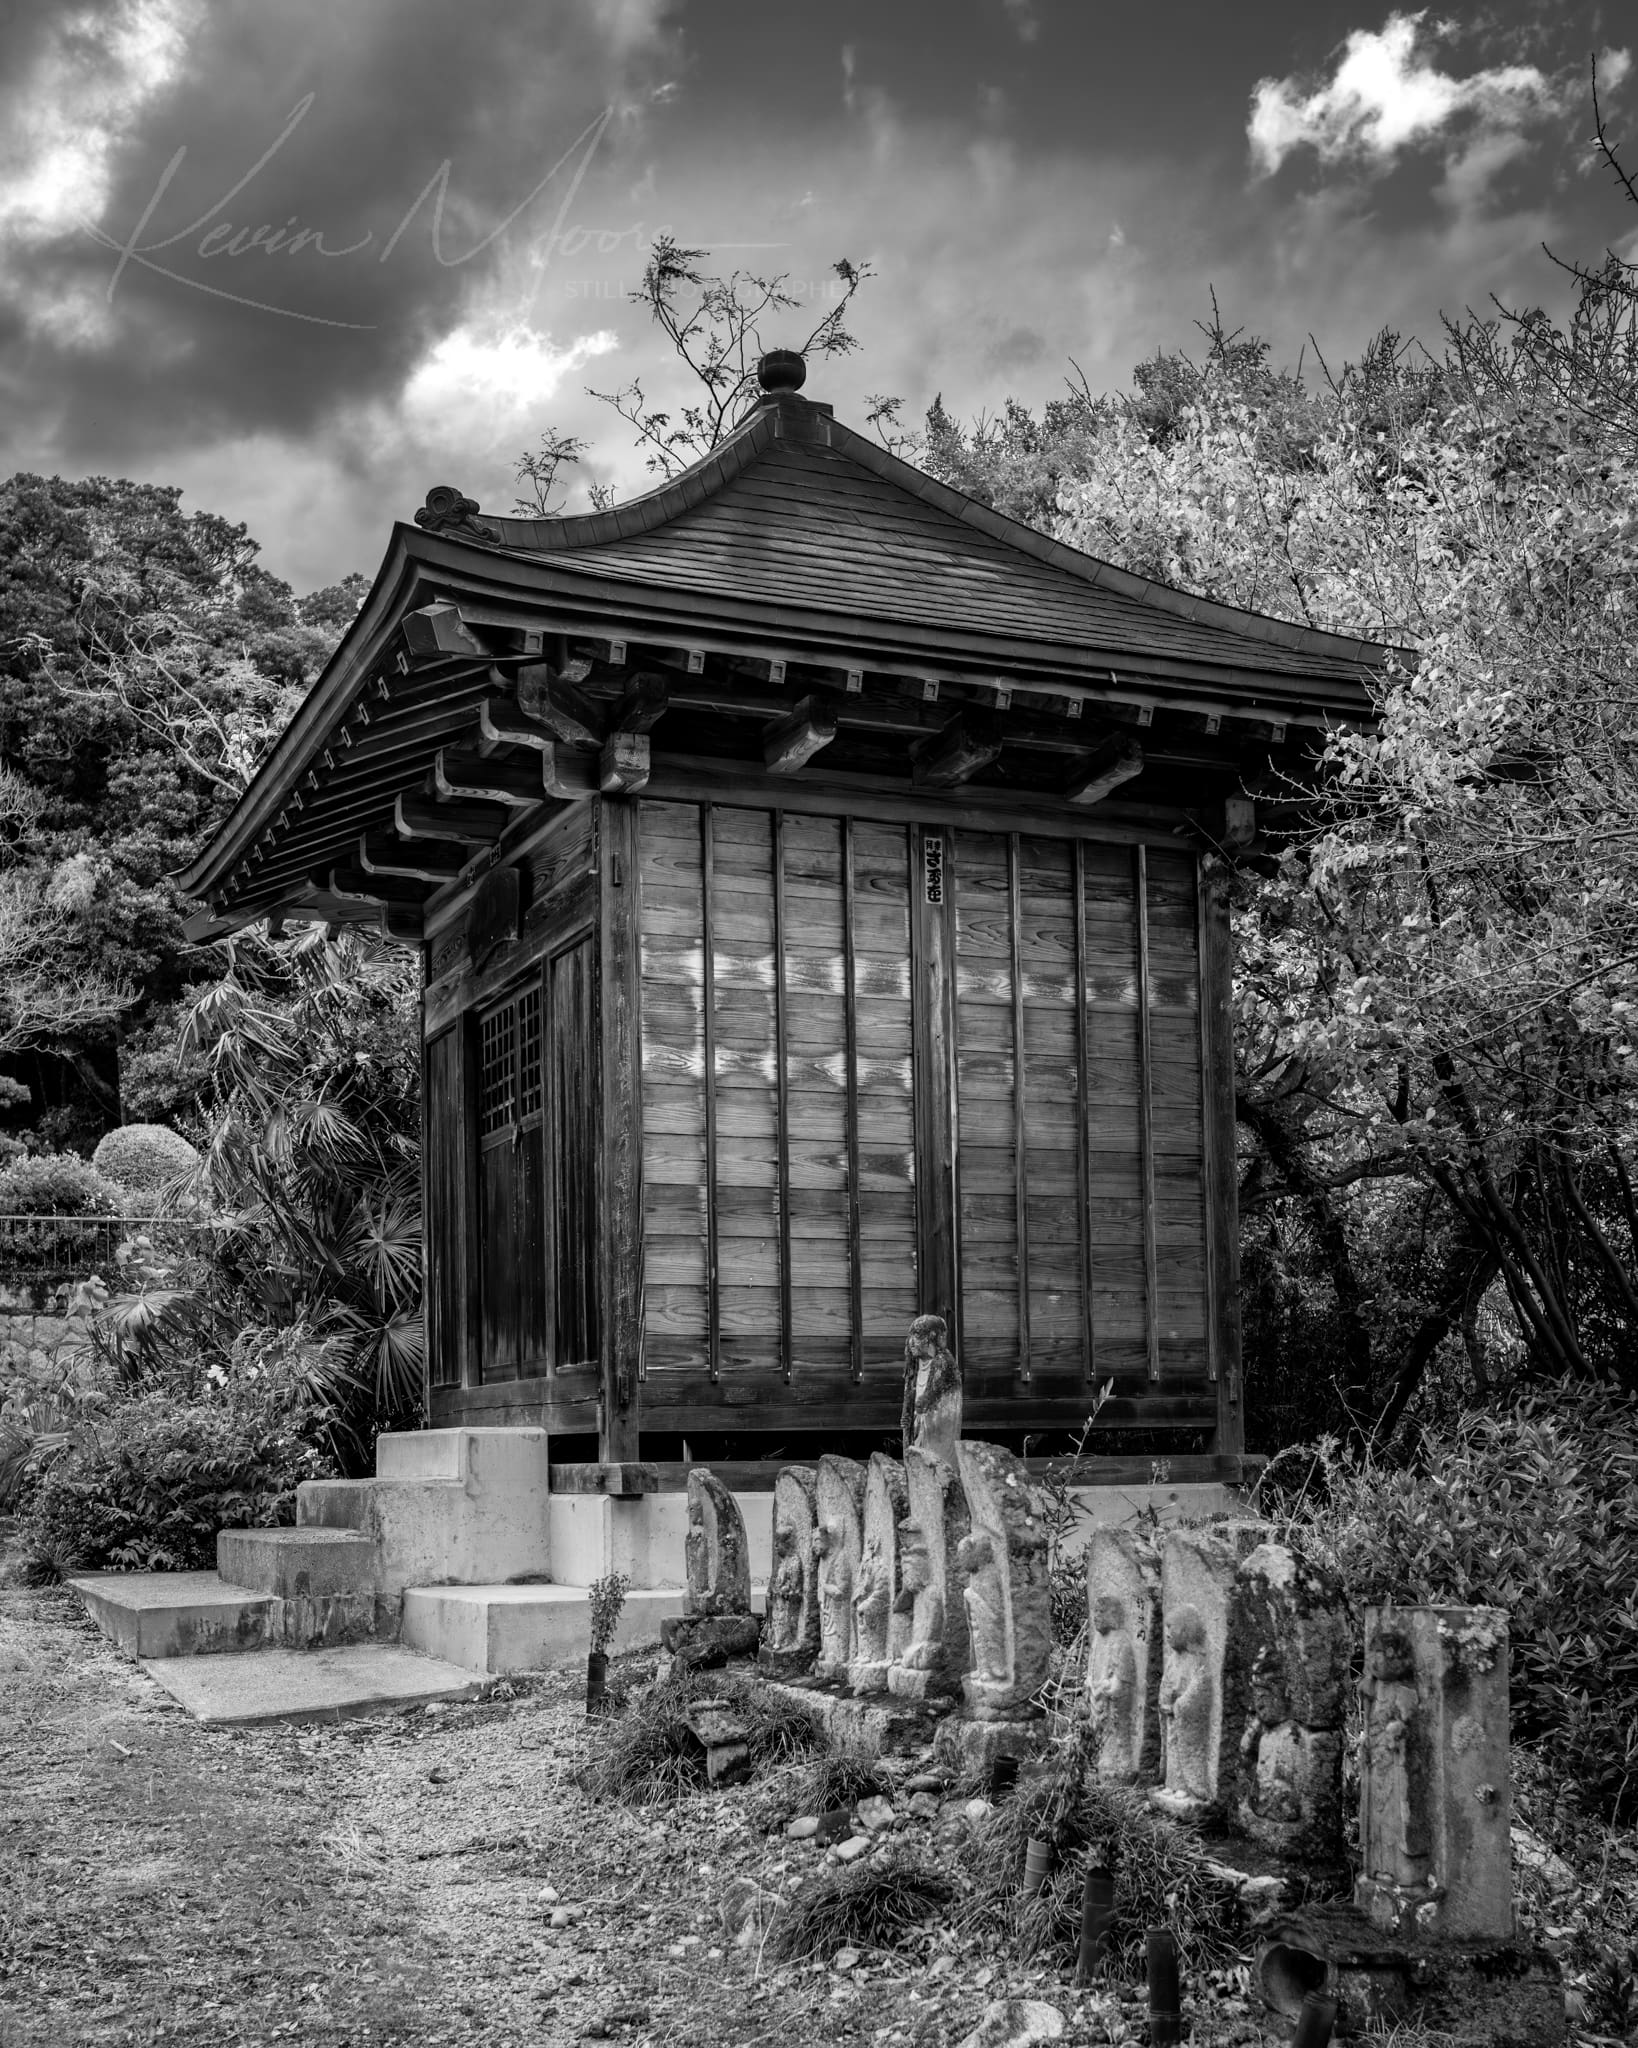 Black and white image of a serene Japanese garden with a traditional wooden pavilion.